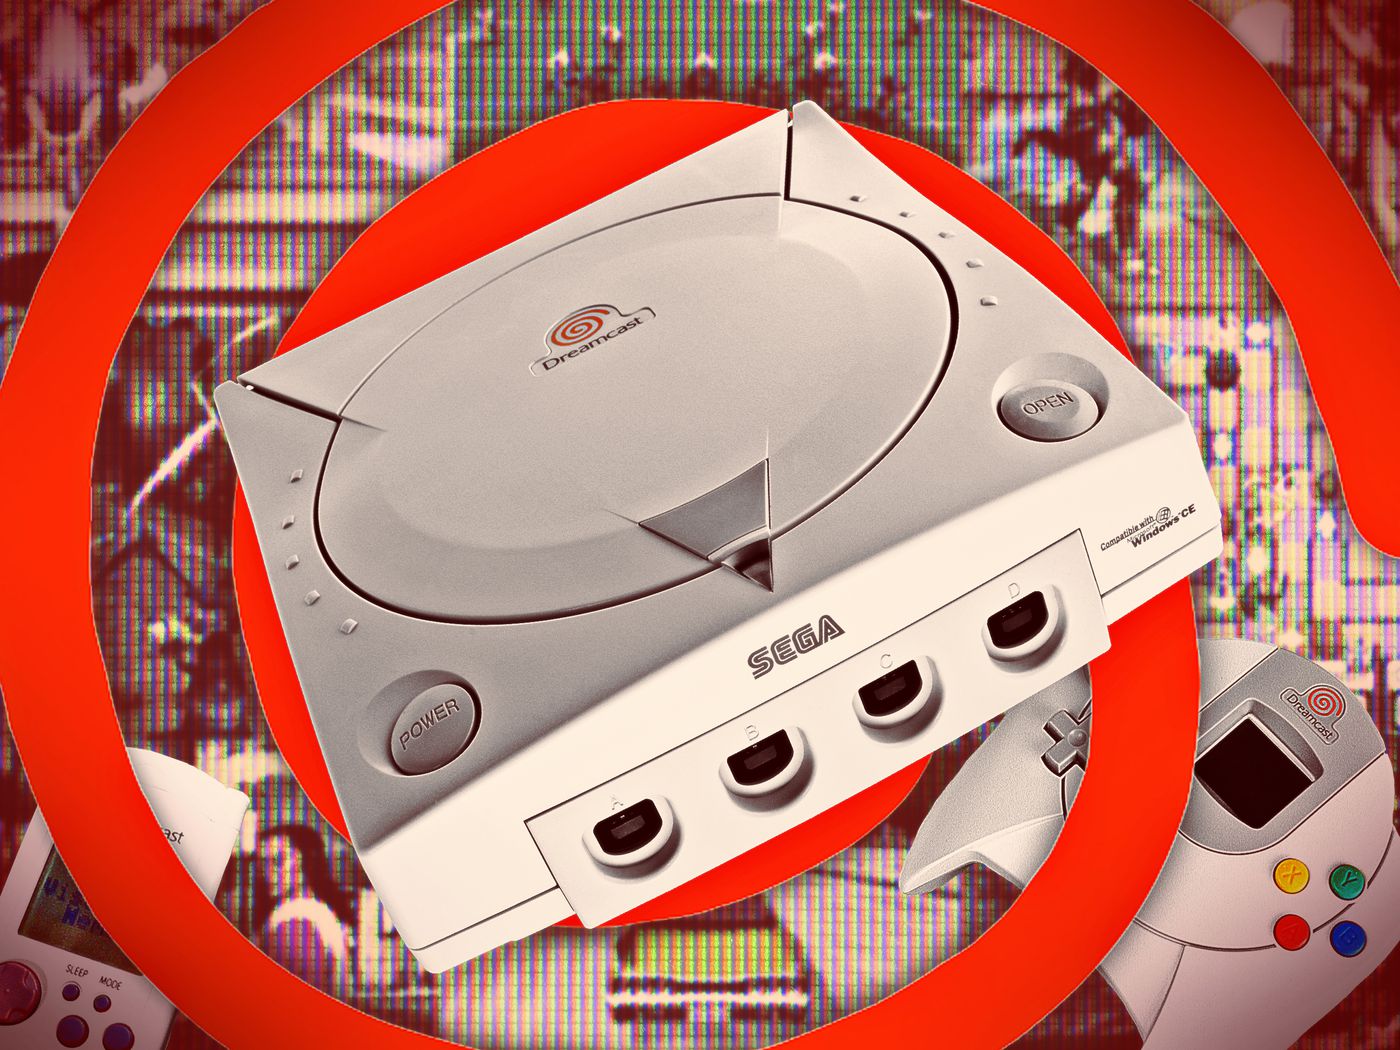 The Dreamcast Died Too Soon, but Its Legacy Lives On